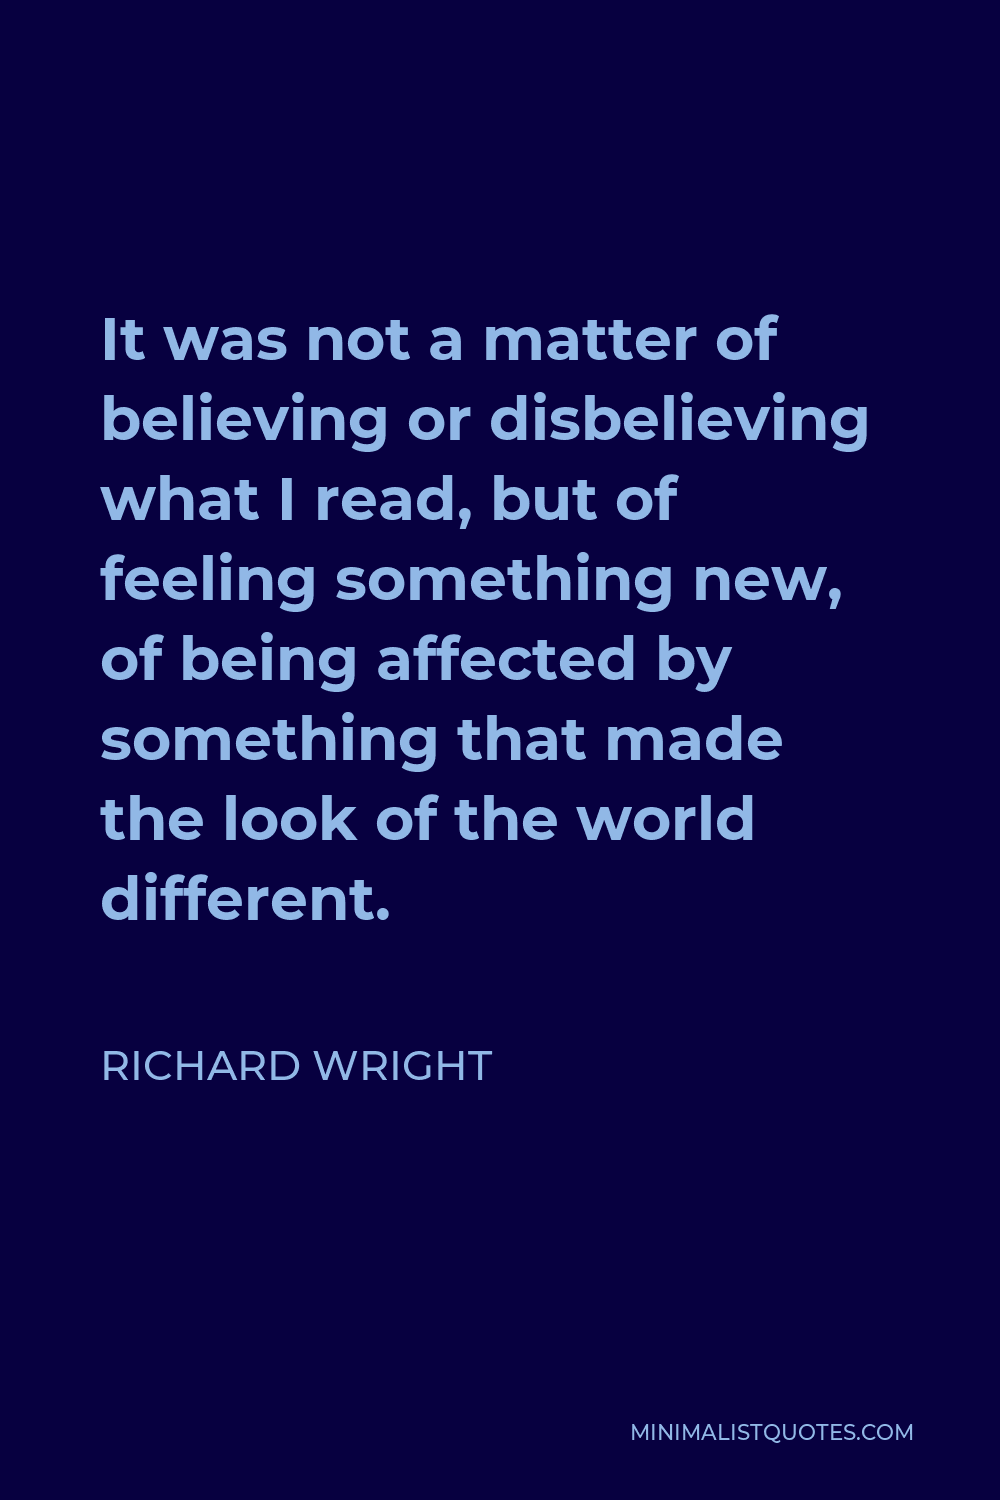 Richard Wright Quote - It was not a matter of believing or disbelieving what I read, but of feeling something new, of being affected by something that made the look of the world different.